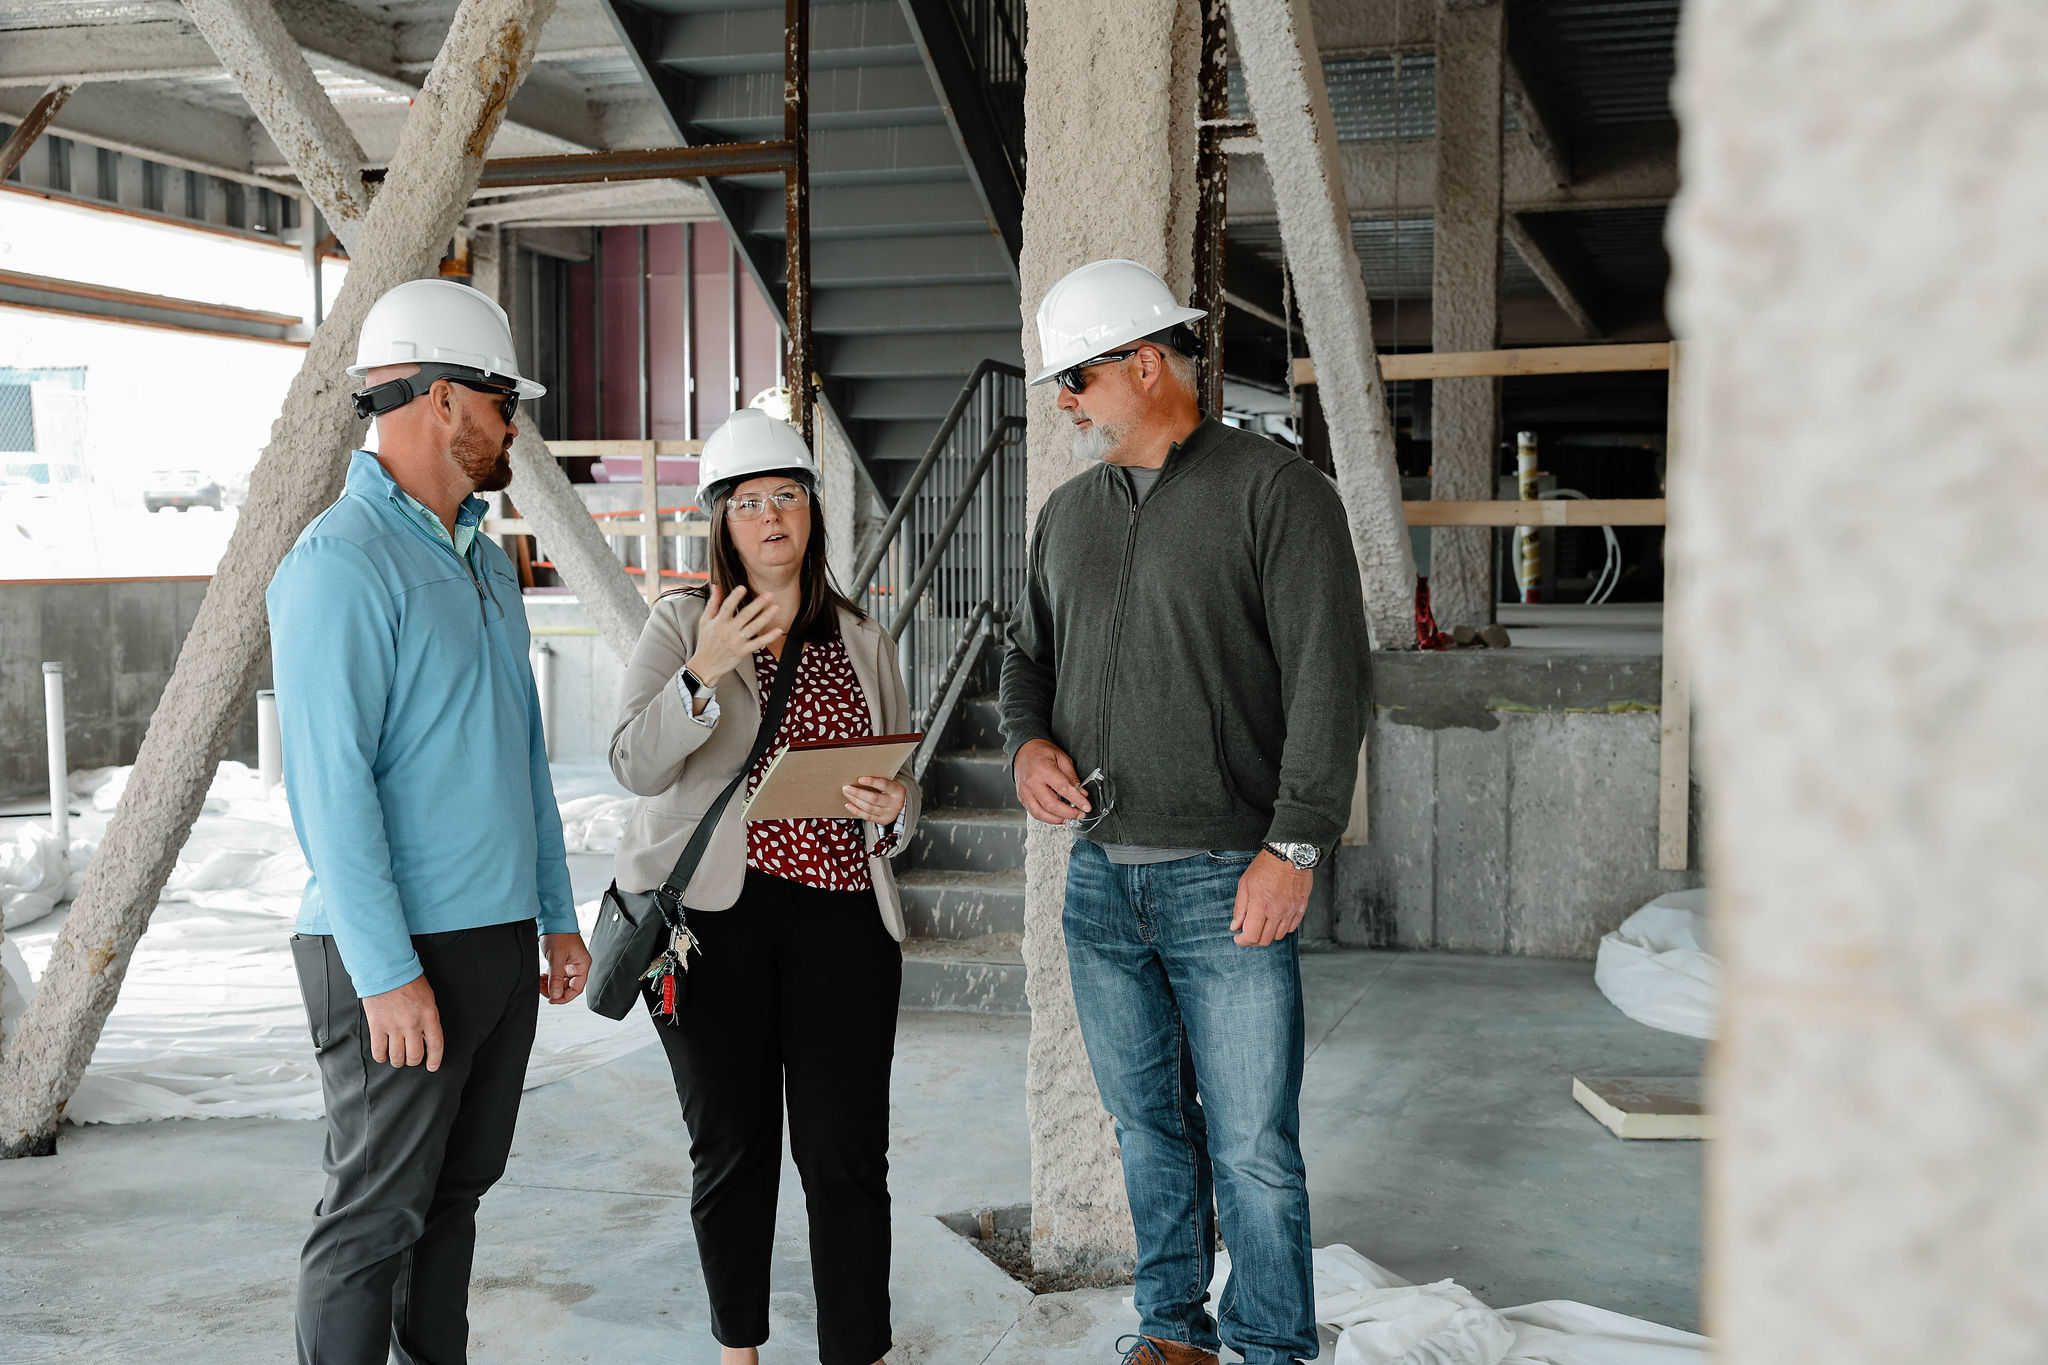 A photograph of three people at a construction site, wearing hardhats, discussing plans.